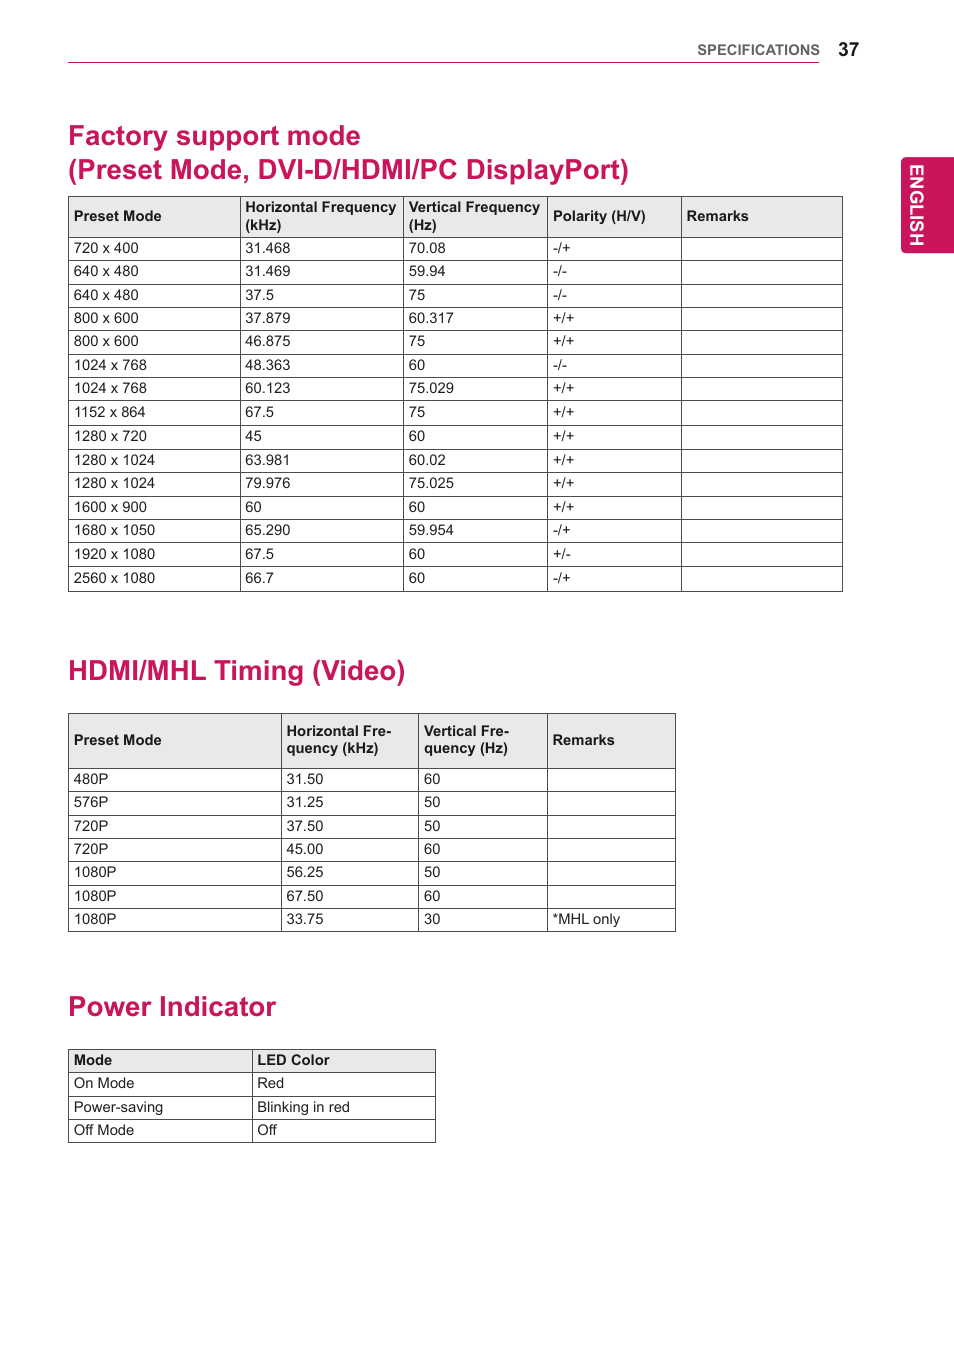 Hdmi/mhl timing (video), Power indicator, 37 factory support mode | Preset mode, dvi-d/hdmi/pc displayport), 37 hdmi/mhl timing (video) 37 power indicator | LG 29EA73-P User Manual | Page 37 / 39